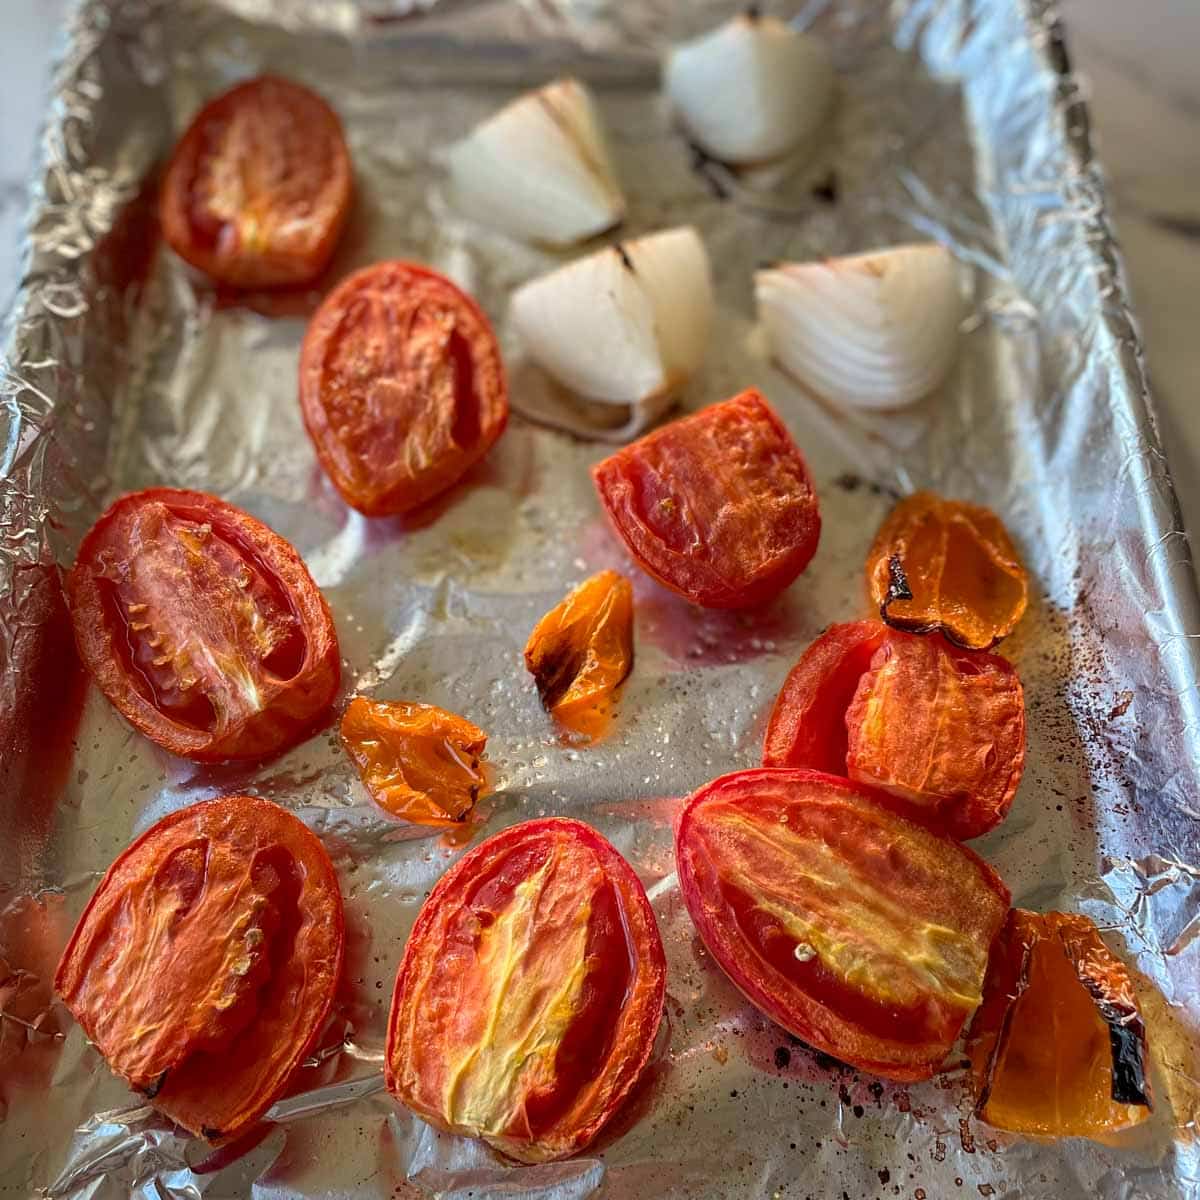 Roasted tomato, habanero, and onion are shown on a sheet tray.